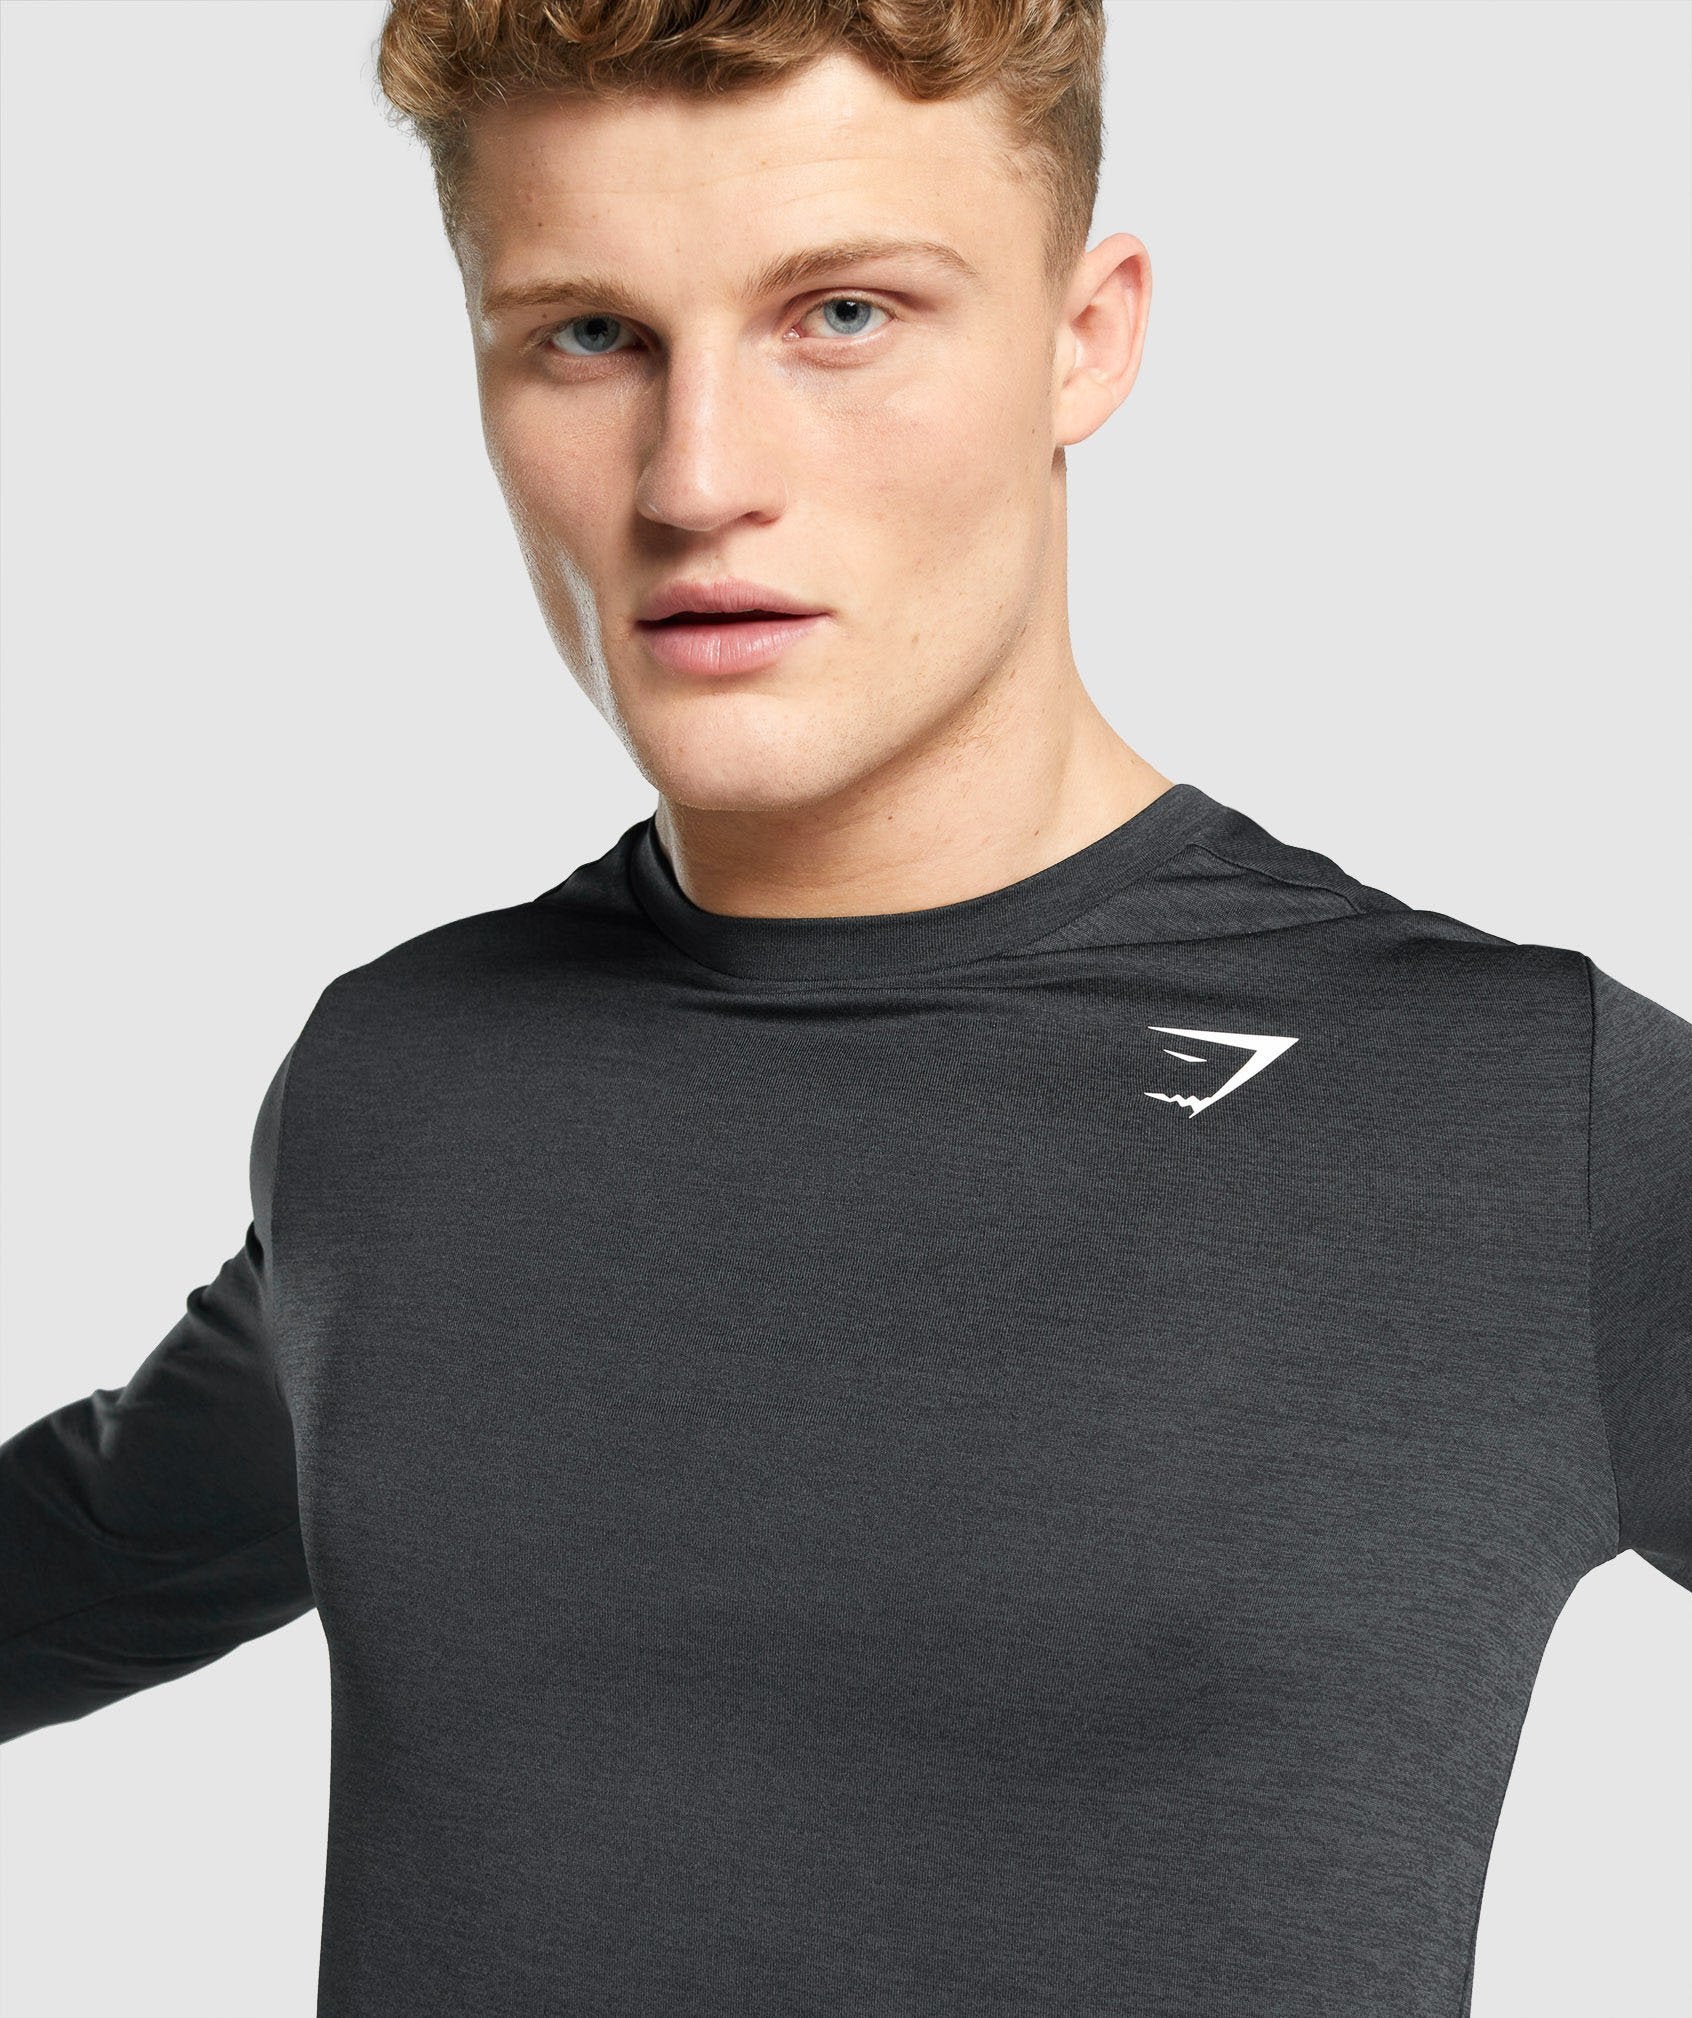 Arrival Marl Long Sleeve T-Shirt in Black Marl - view 5